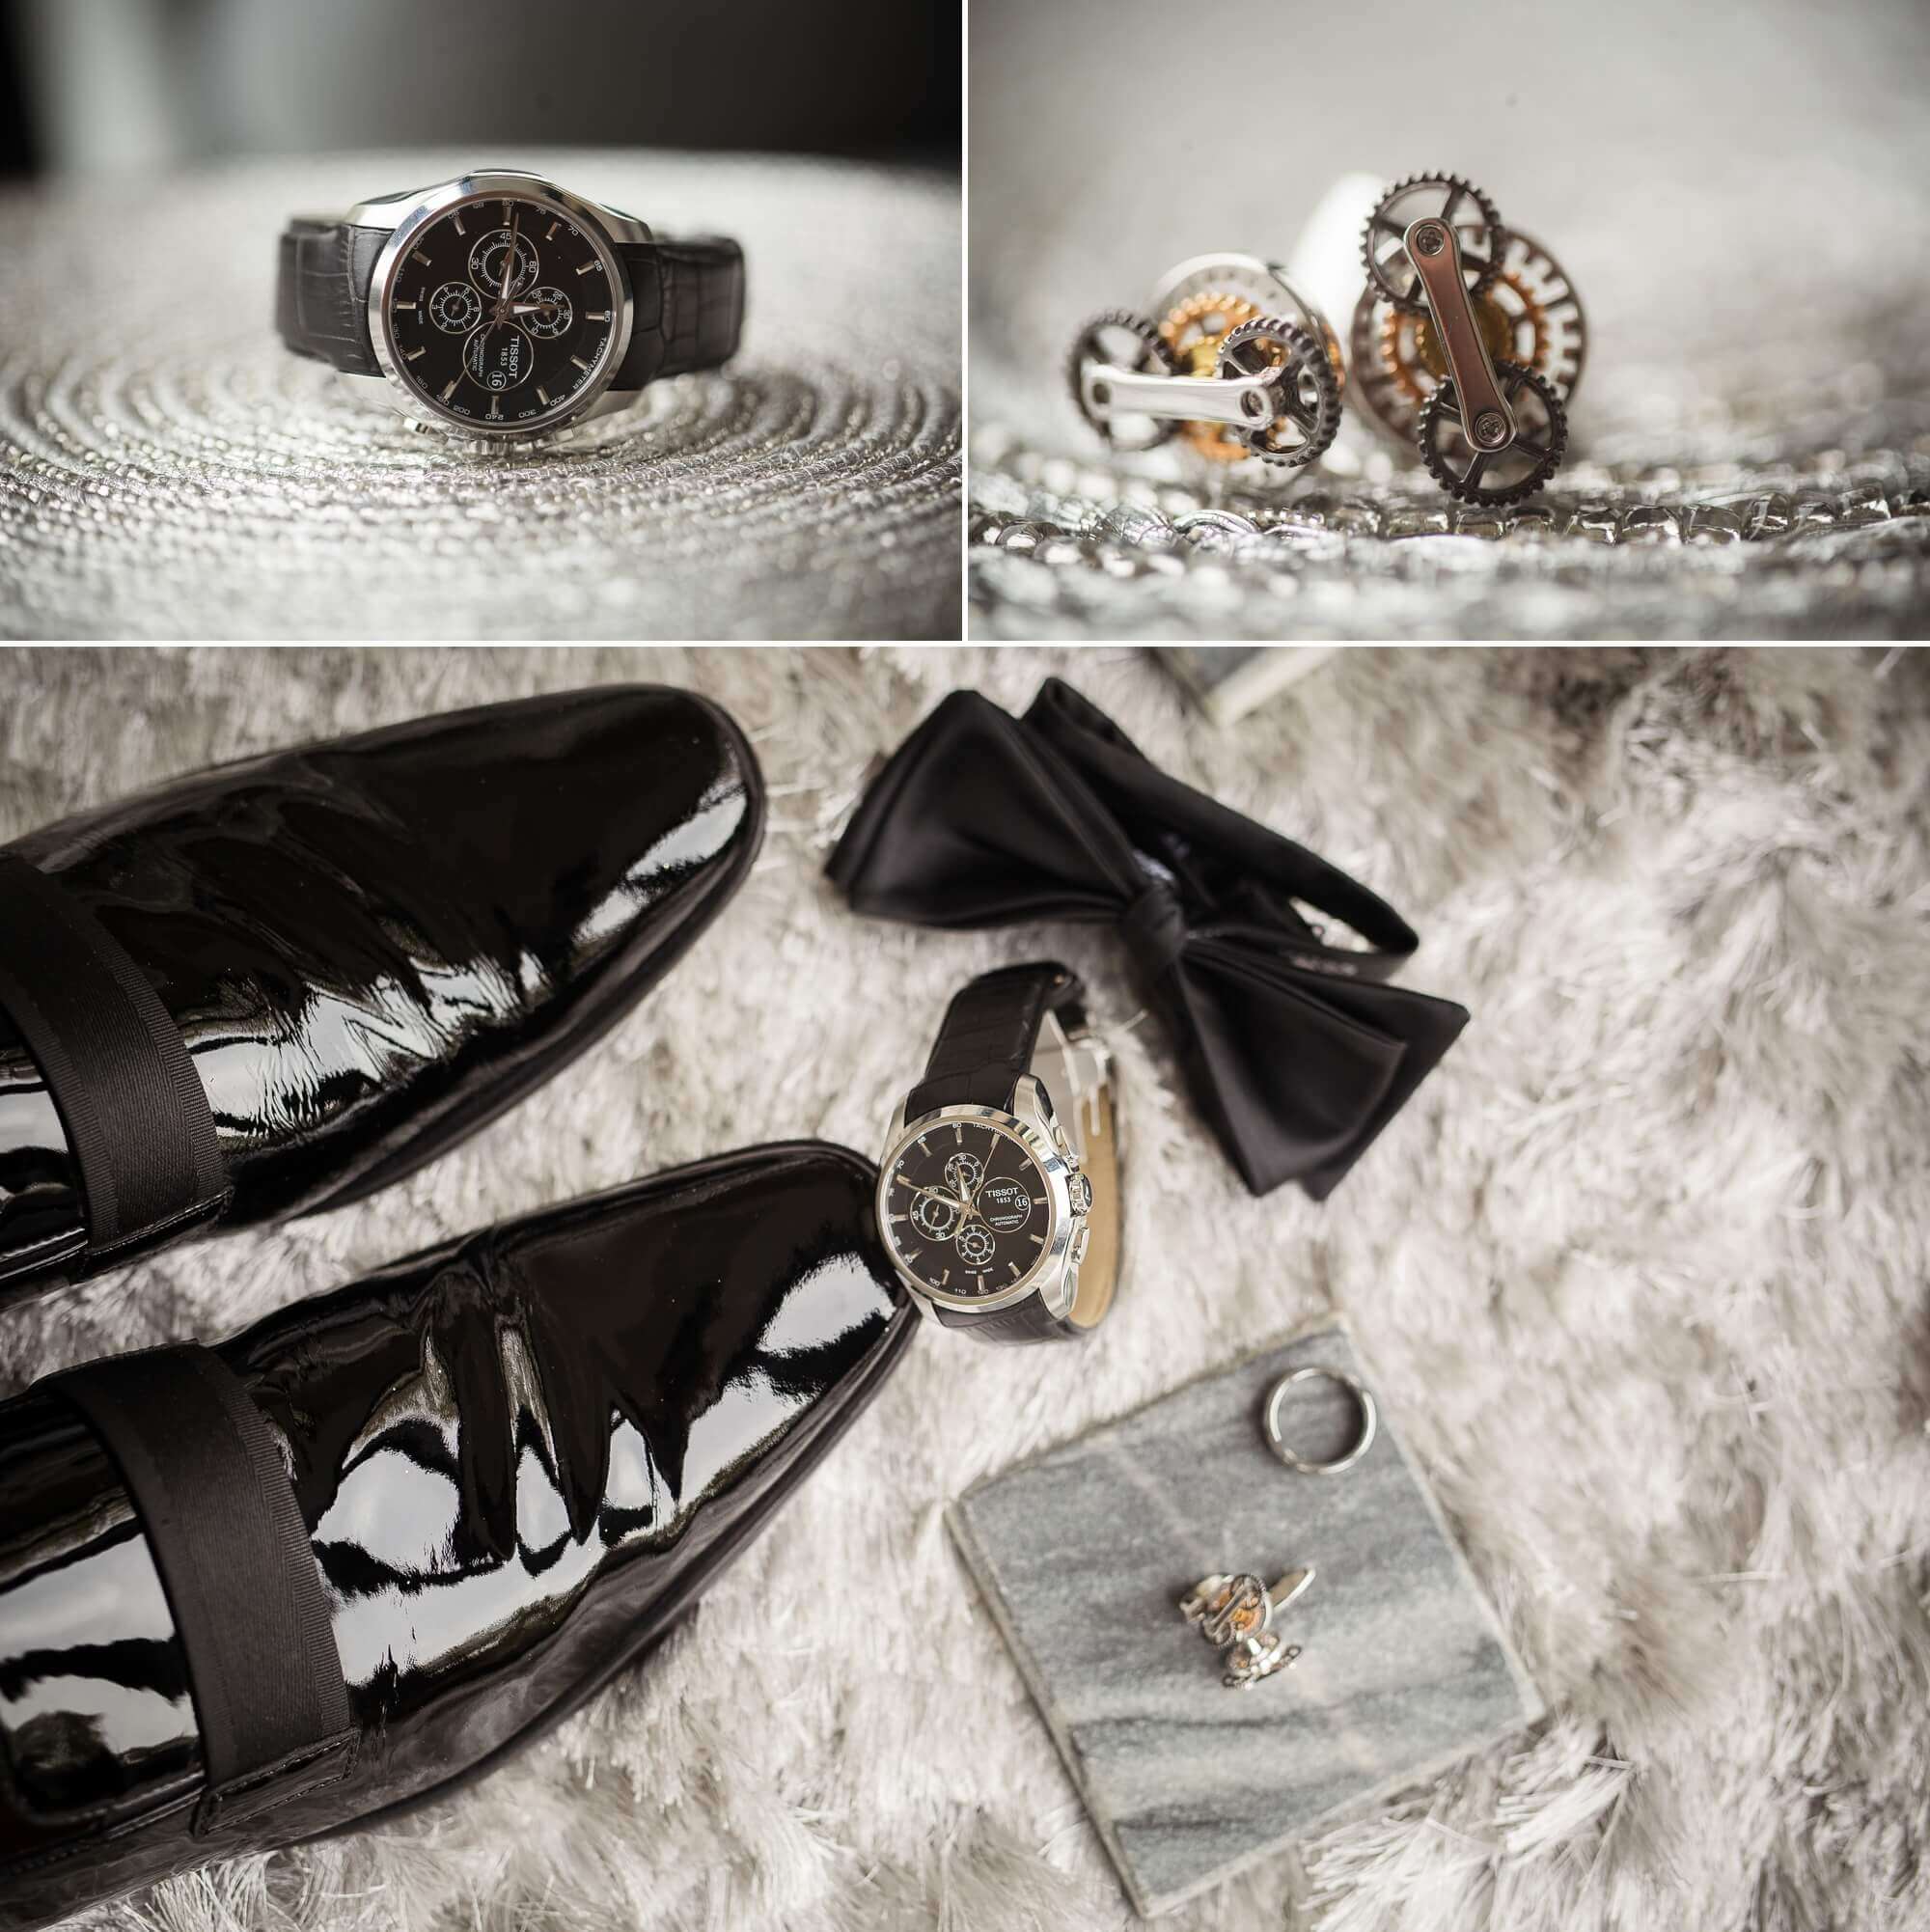 Details of the grooms watch, cufflinks, bowtie and shoes for his wedding day 